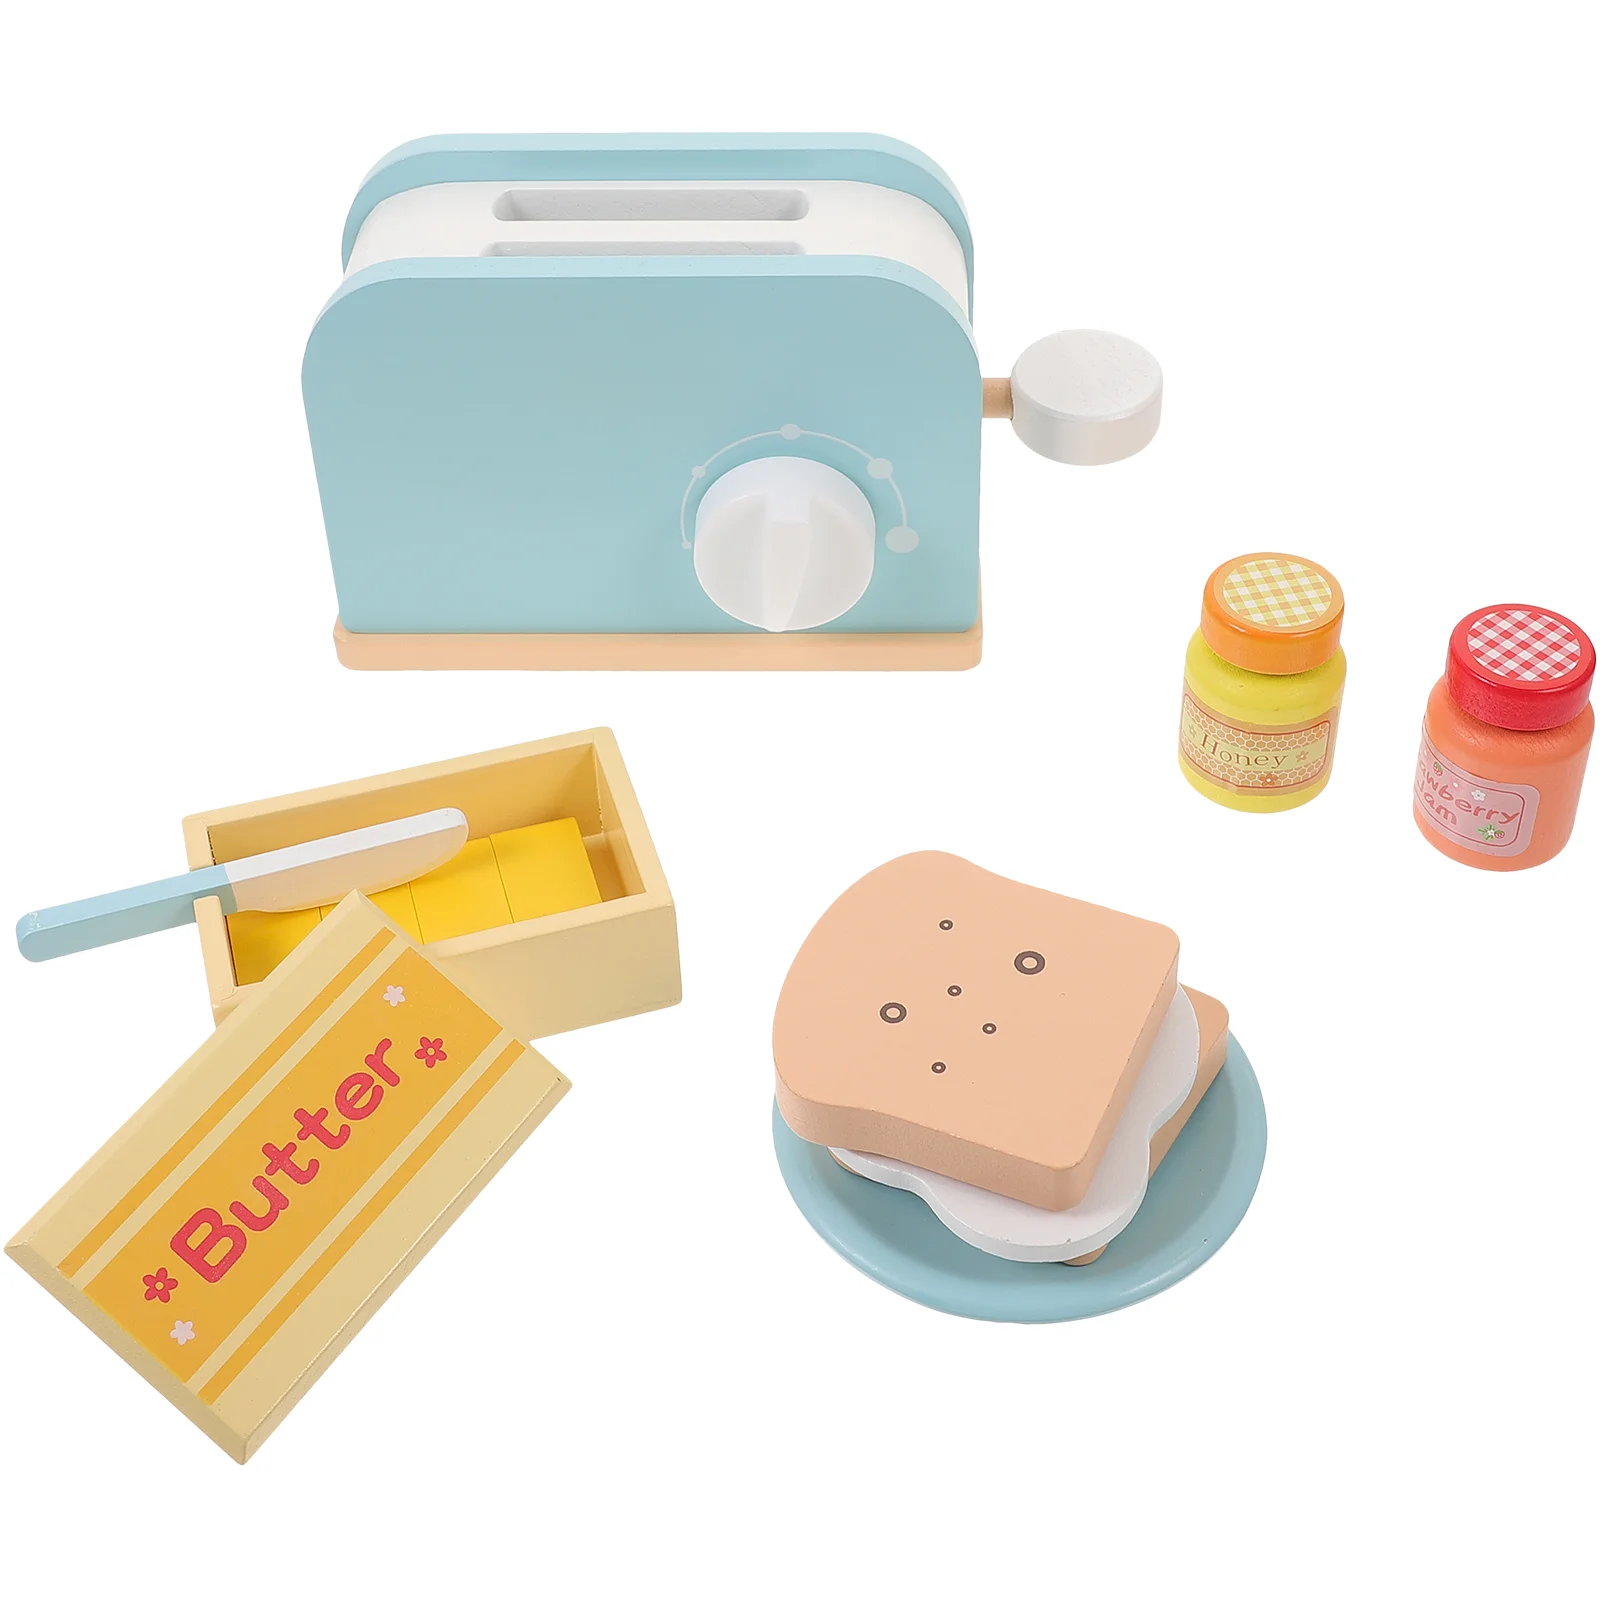 

Children Role Play Toy Bread Maker Machine Toaster Pretend Kitchen Mini Toys Kids Playing House Wooden Cooking Appliance